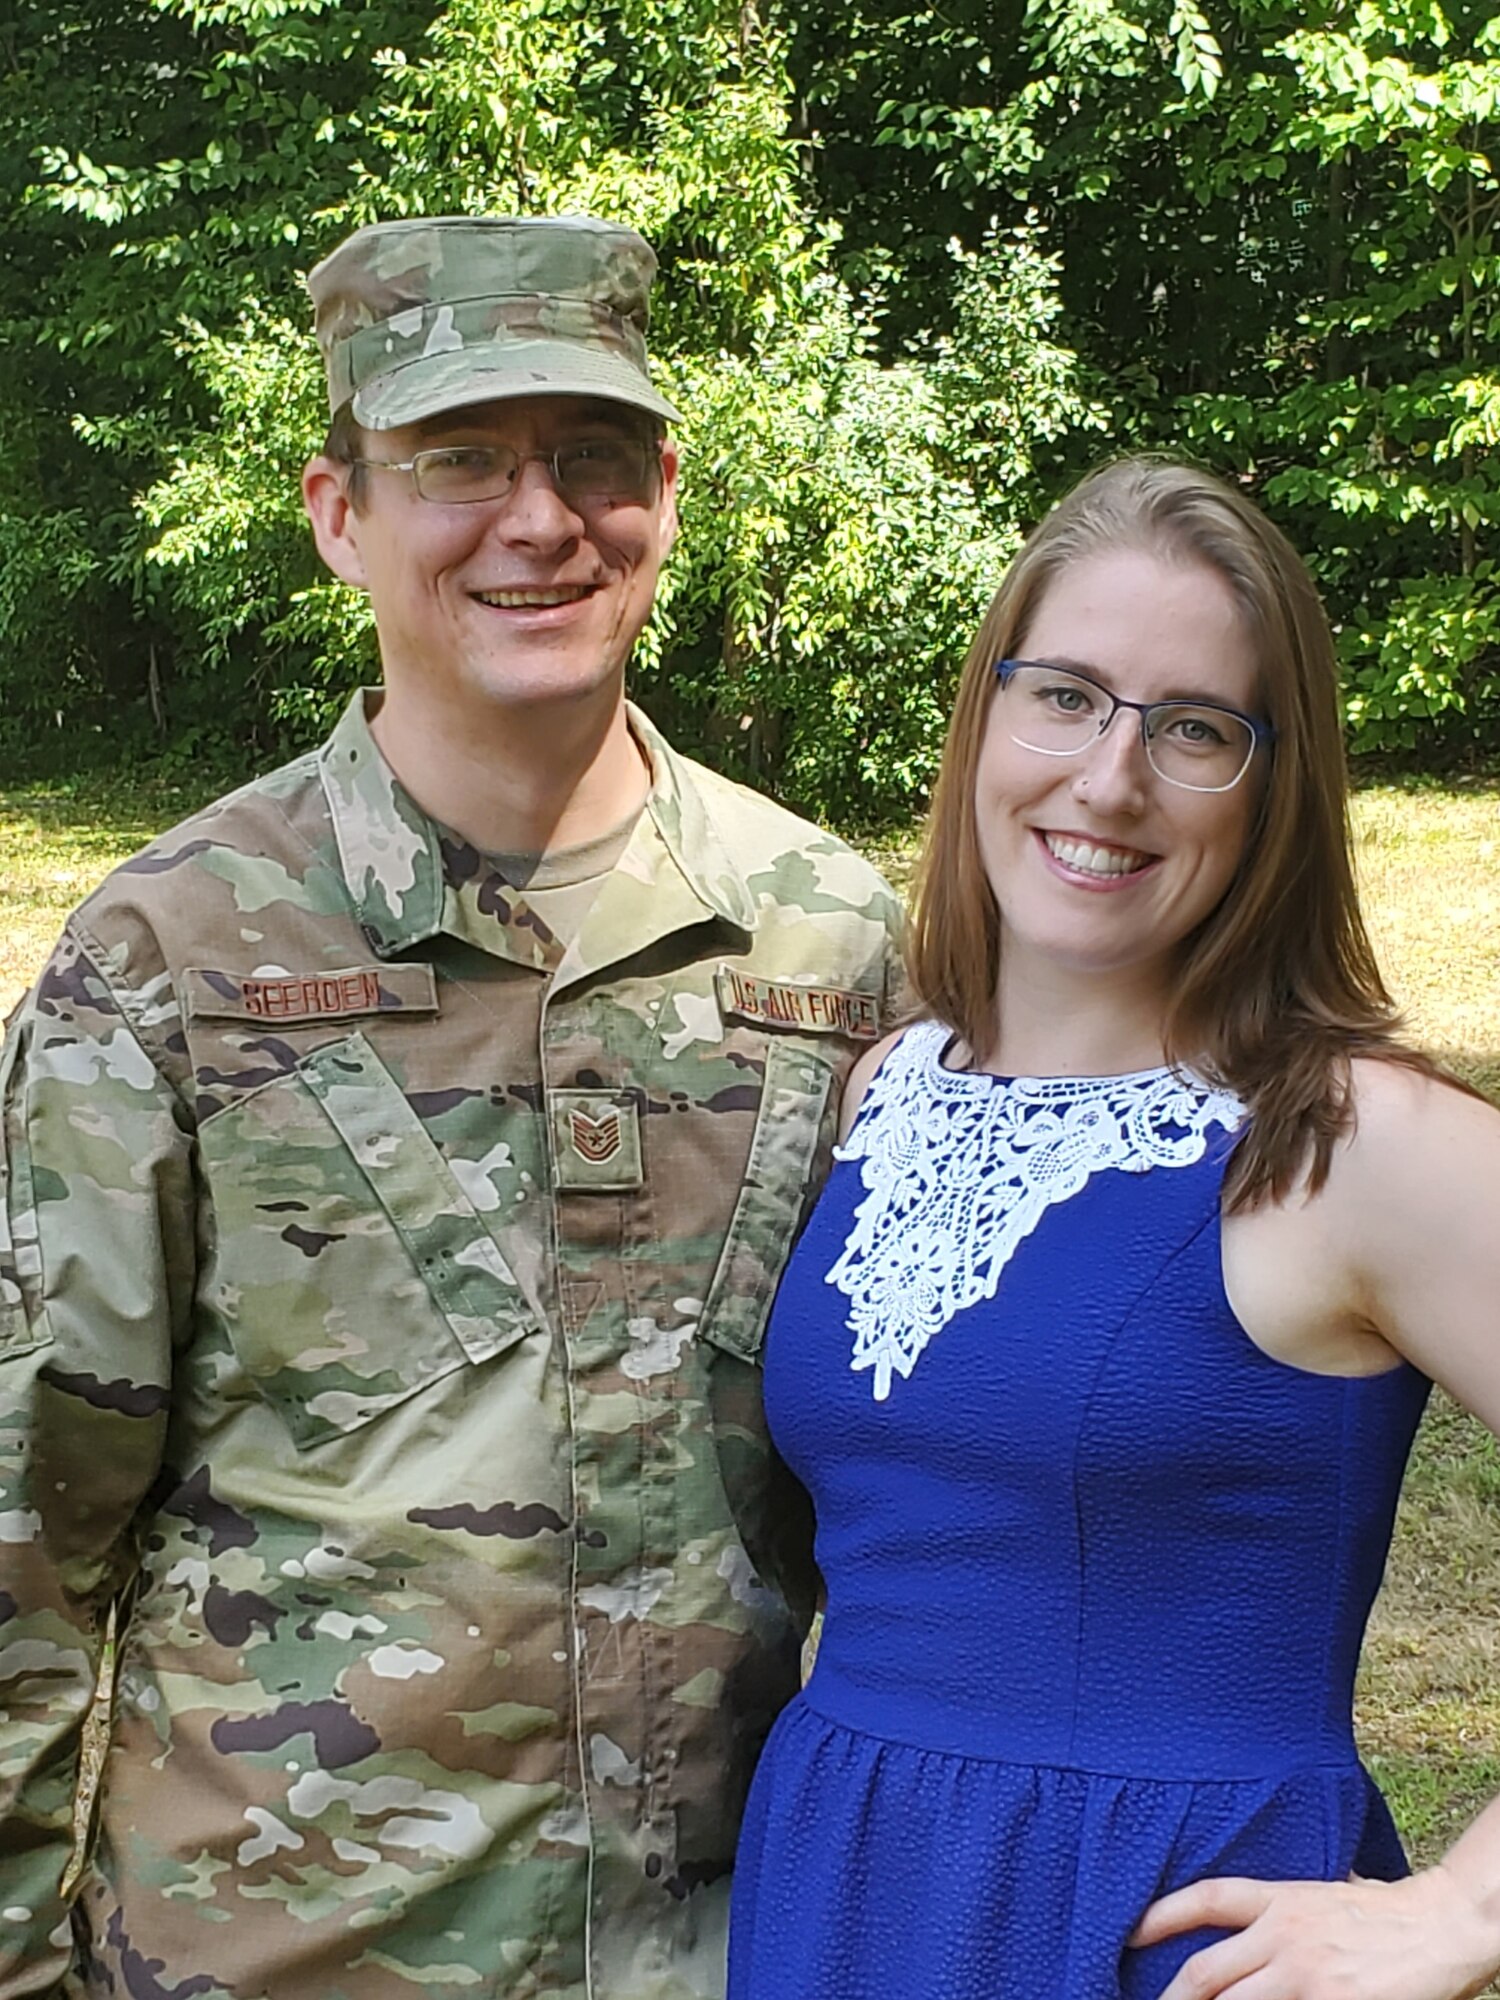 Tech. Sgt. George Seerden, 960th Cyberspace Operations Group NCO in charge of Standards and Evaluations, stands next to his significant other, Janelle, in his backyard Aug. 1, 2020, Johnston, Rhode Island. (Courtesy photo by Justine Boucher)